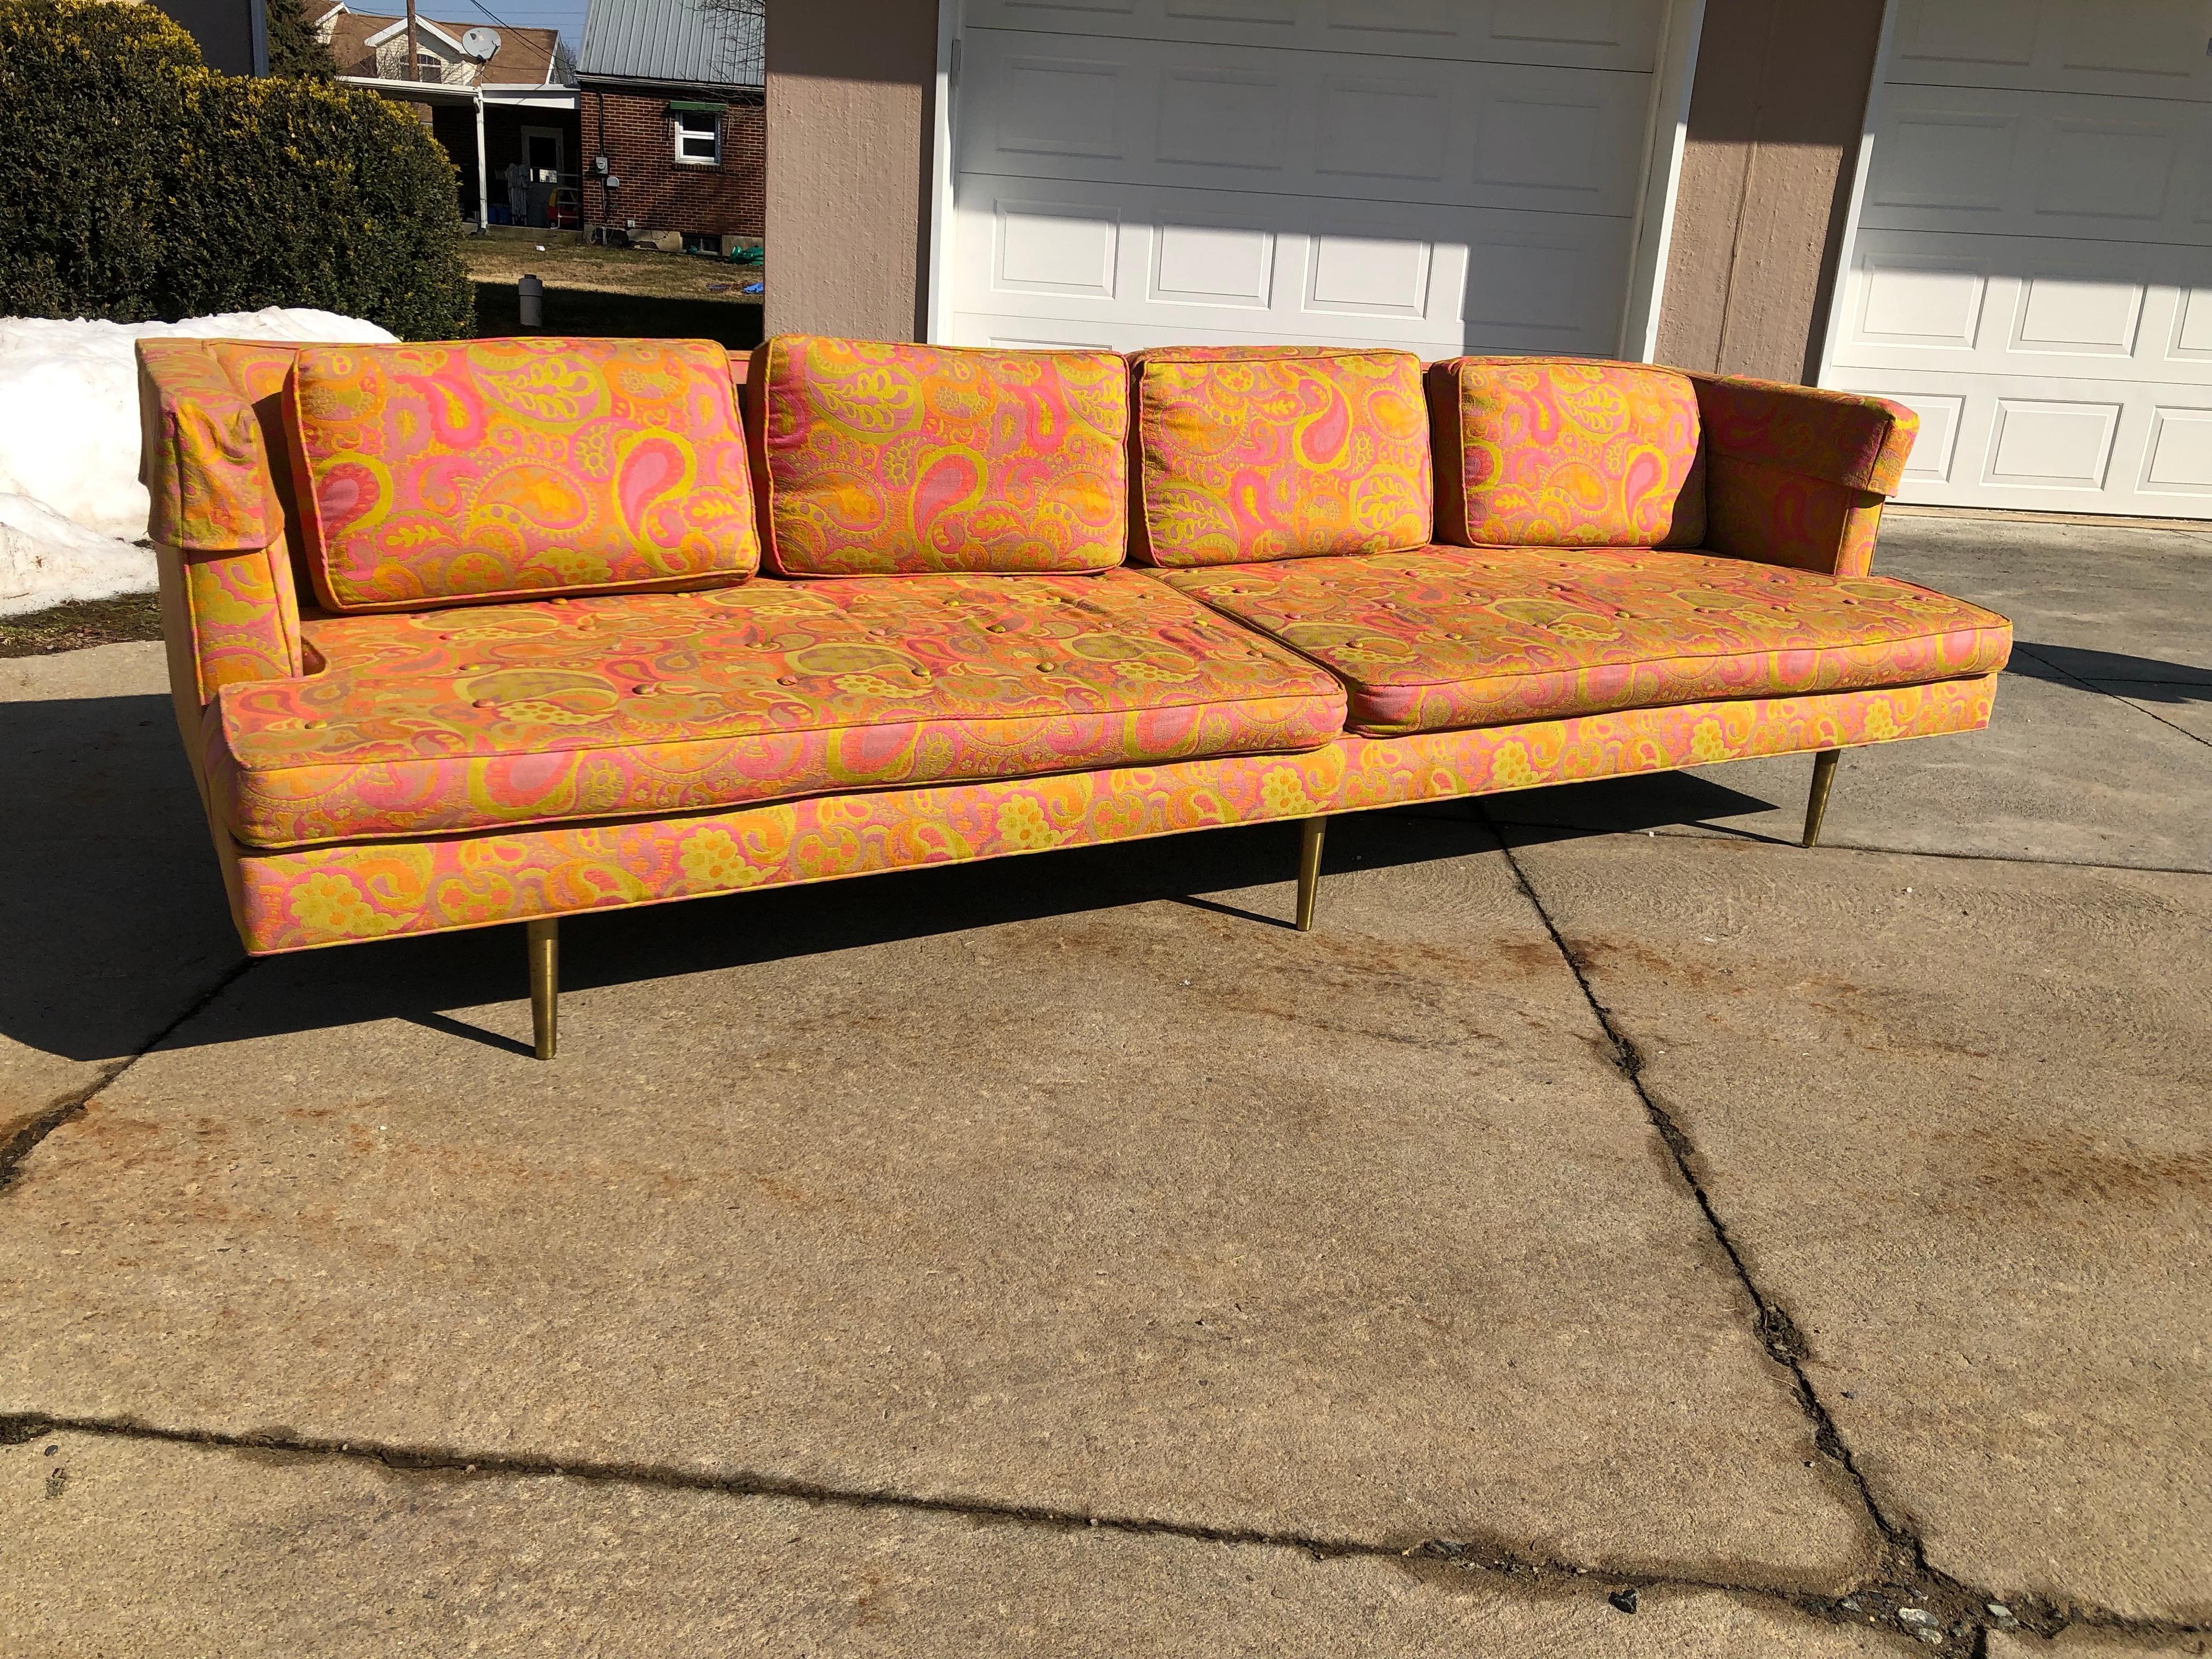 Edward Wormley for Dunbar sofa 4907 original Pop Art Pucci fabric great very little fade rare brass six legs.
A gorgeous, increasingly rare 9' long Edward Wormley for Dunbar sofa with rare brass legs. This sofa was model #4907 and two vintage